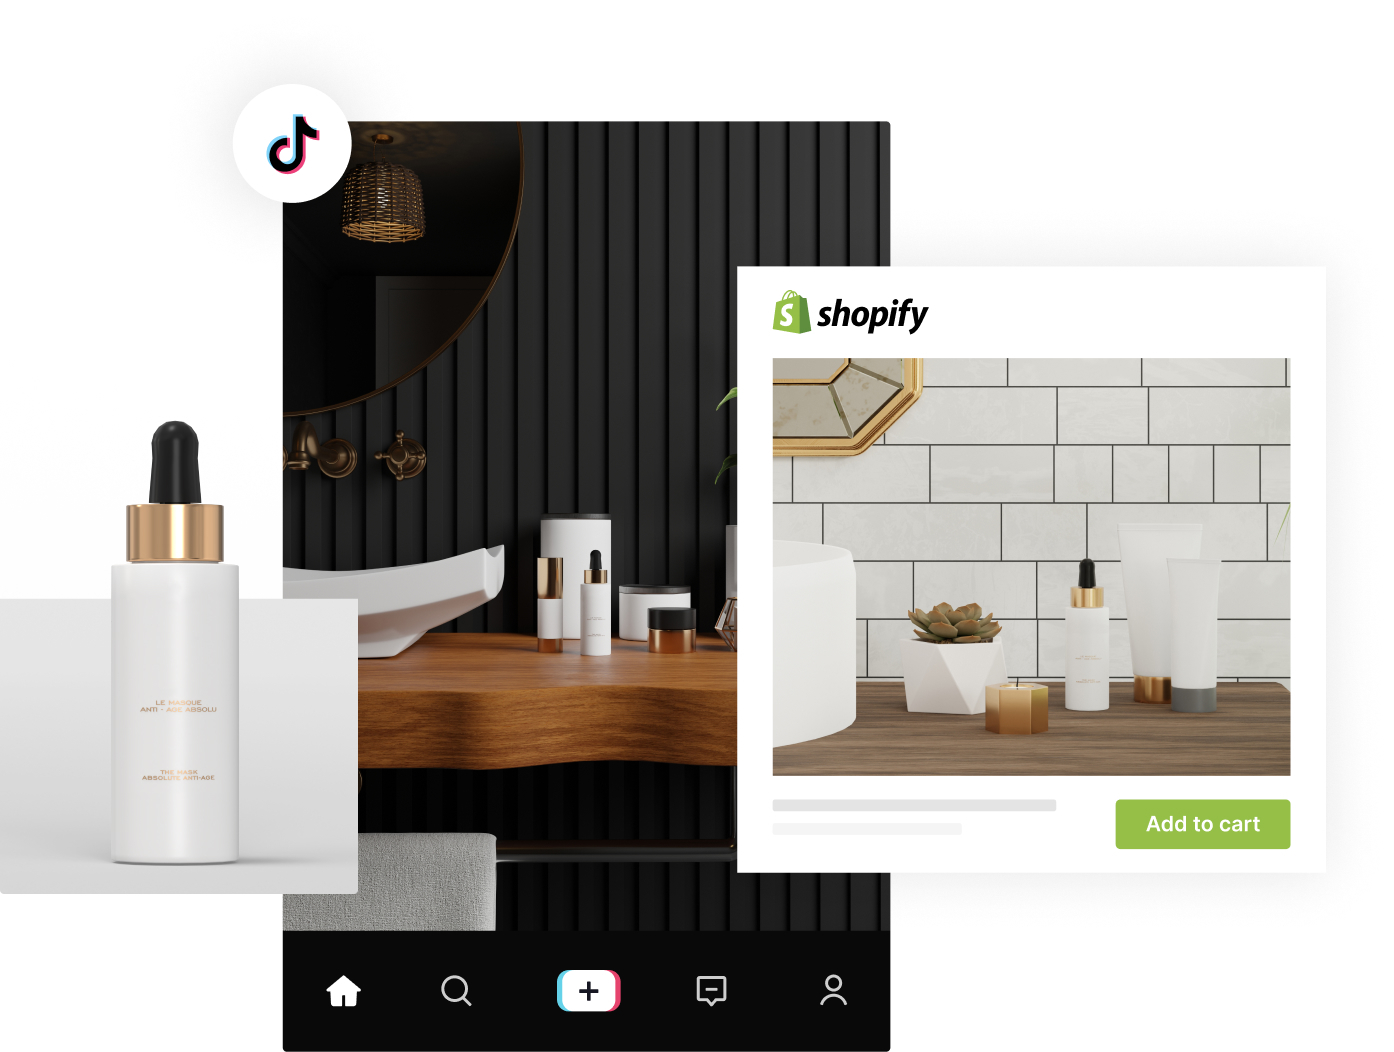 skincare products in imagine.io 3D bathroom templates on tiktok and shopify